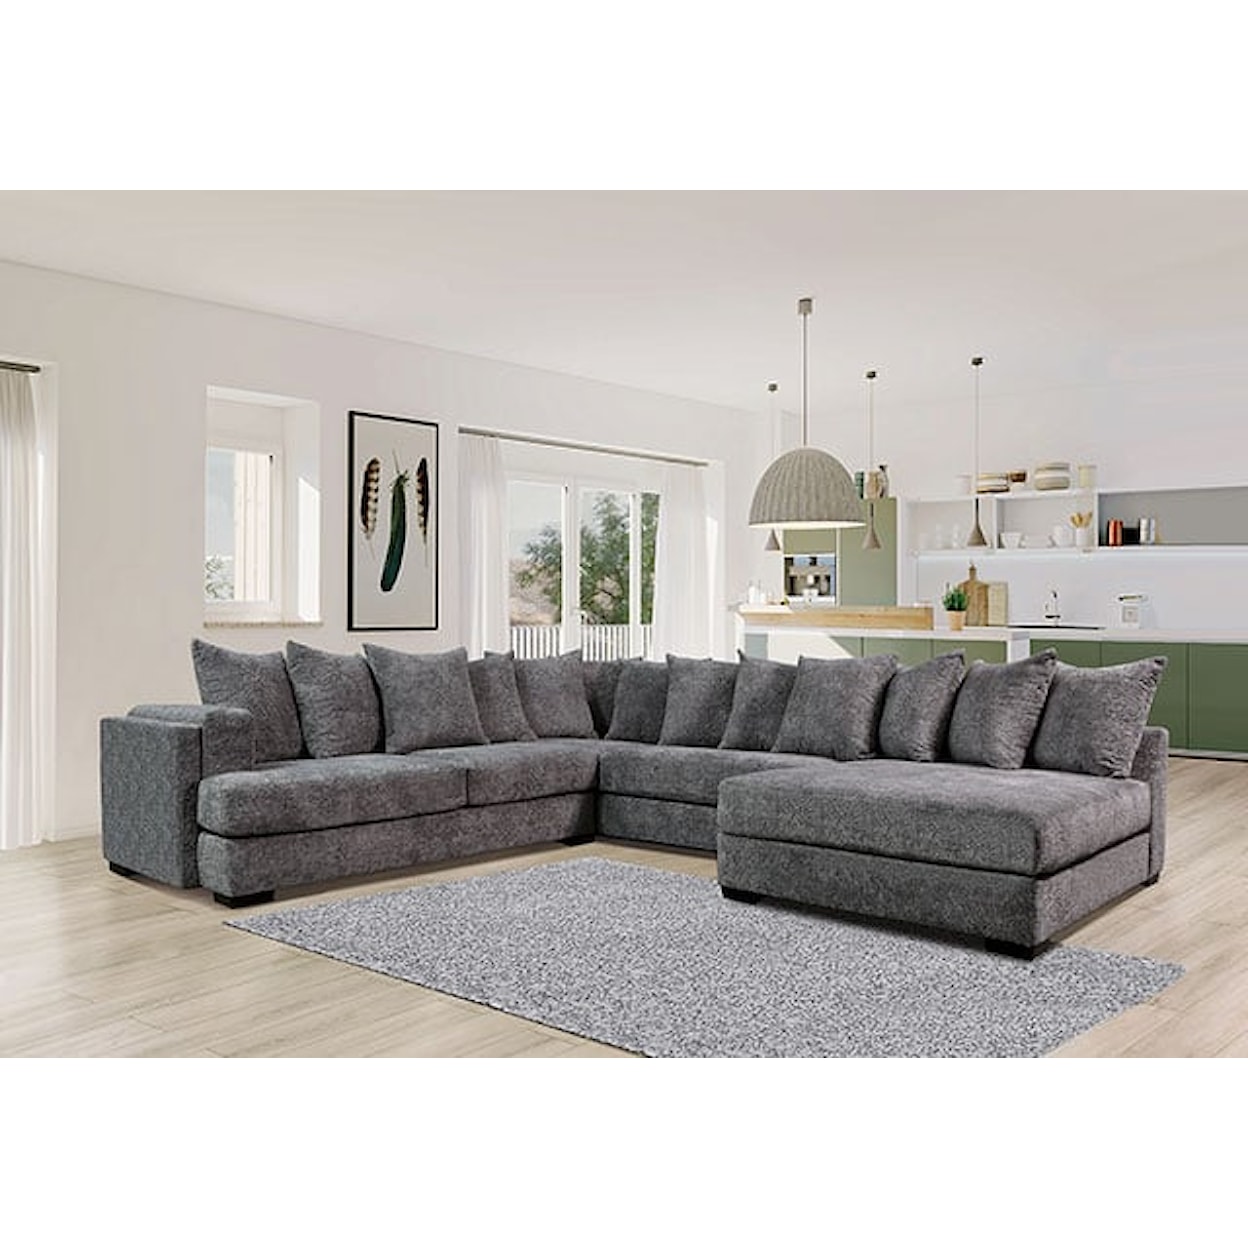 Furniture of America Wolverhampton 3-Piece Sectional